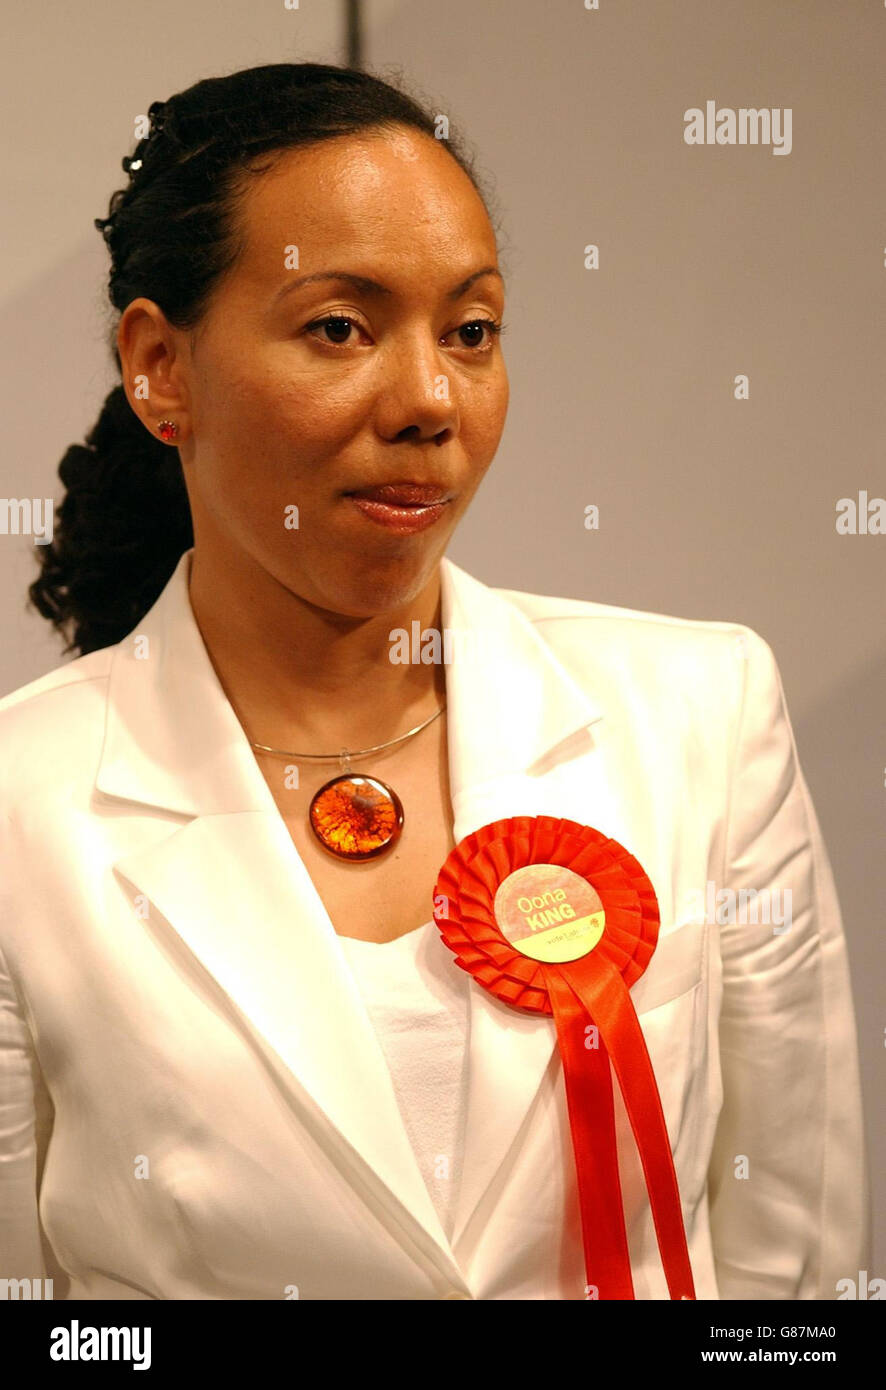 Labour candidate Oona King reacts after former Labour MP George Galloway was elected as MP for the Bethnal Green & Bow constituency at the East Winter Gardens, London. Galloway, standing as a Respect party candidate, beat previous Labour MP Oona King for the seat which had been held by Labour since 1945. Stock Photo